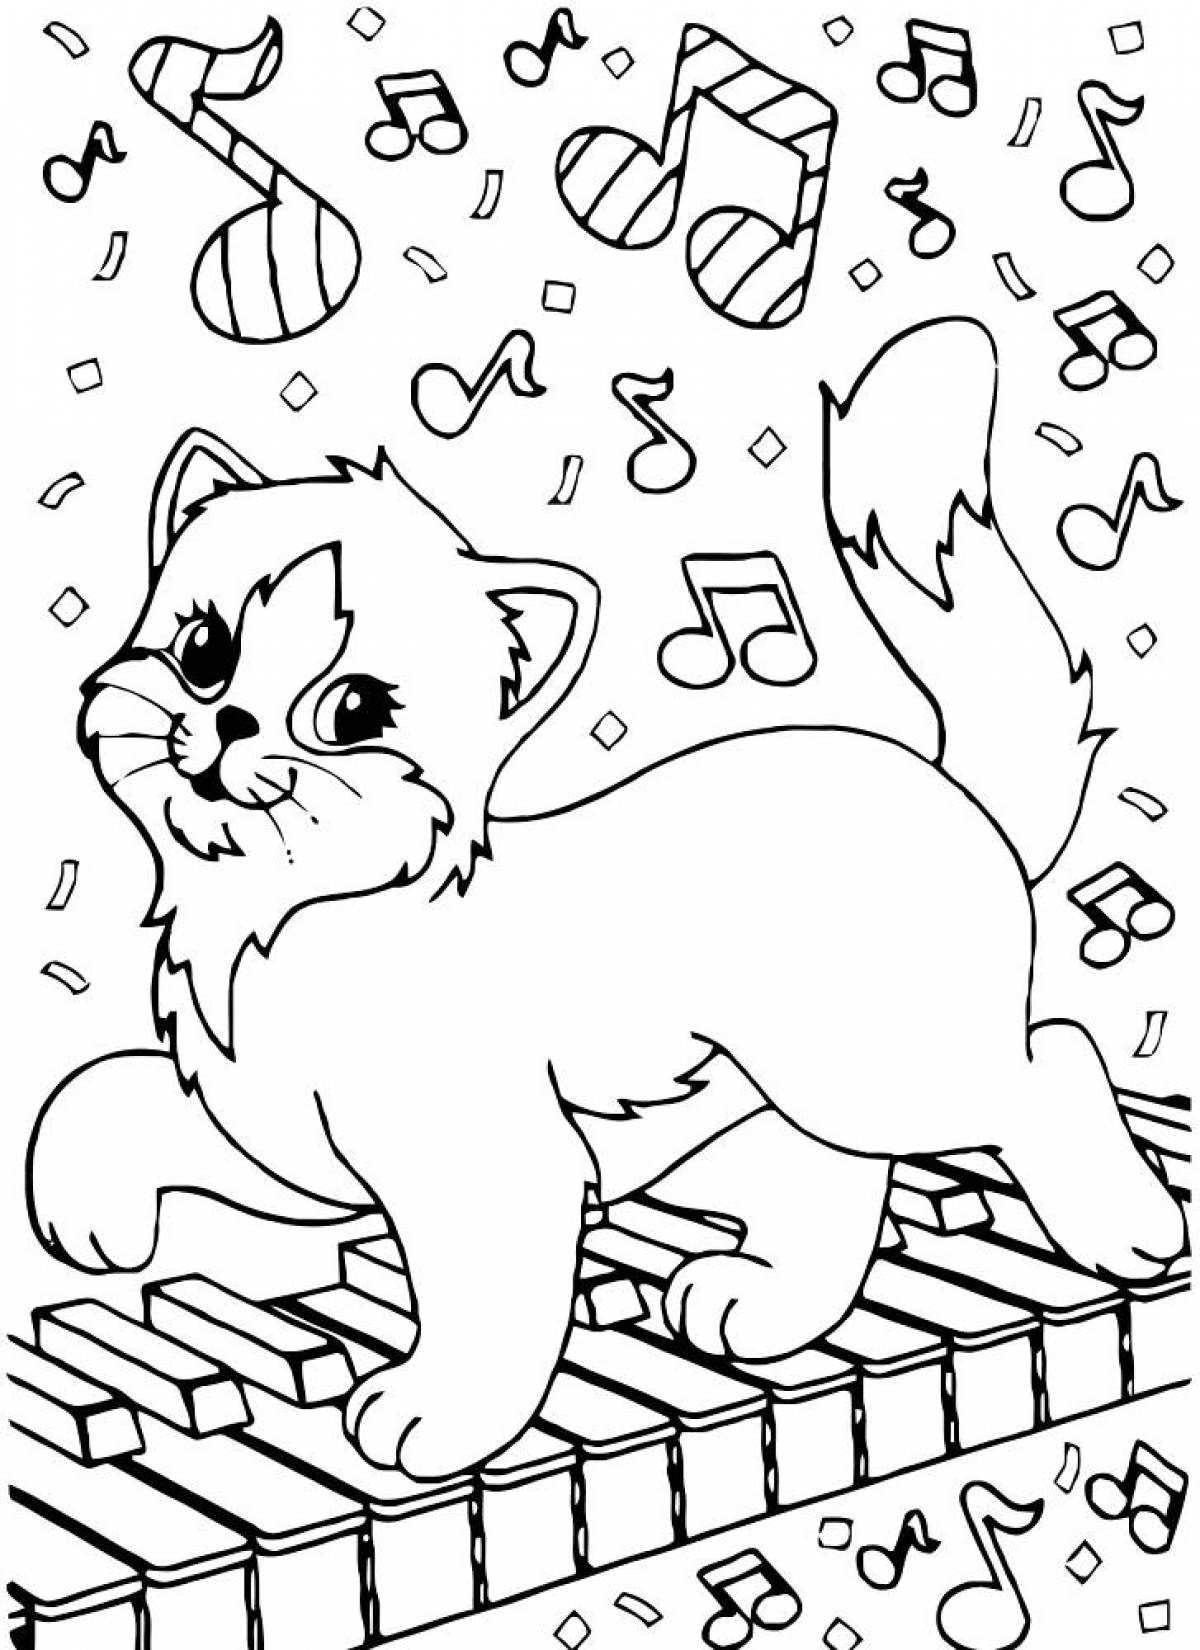 Fluffy cat coloring book for children 6-7 years old